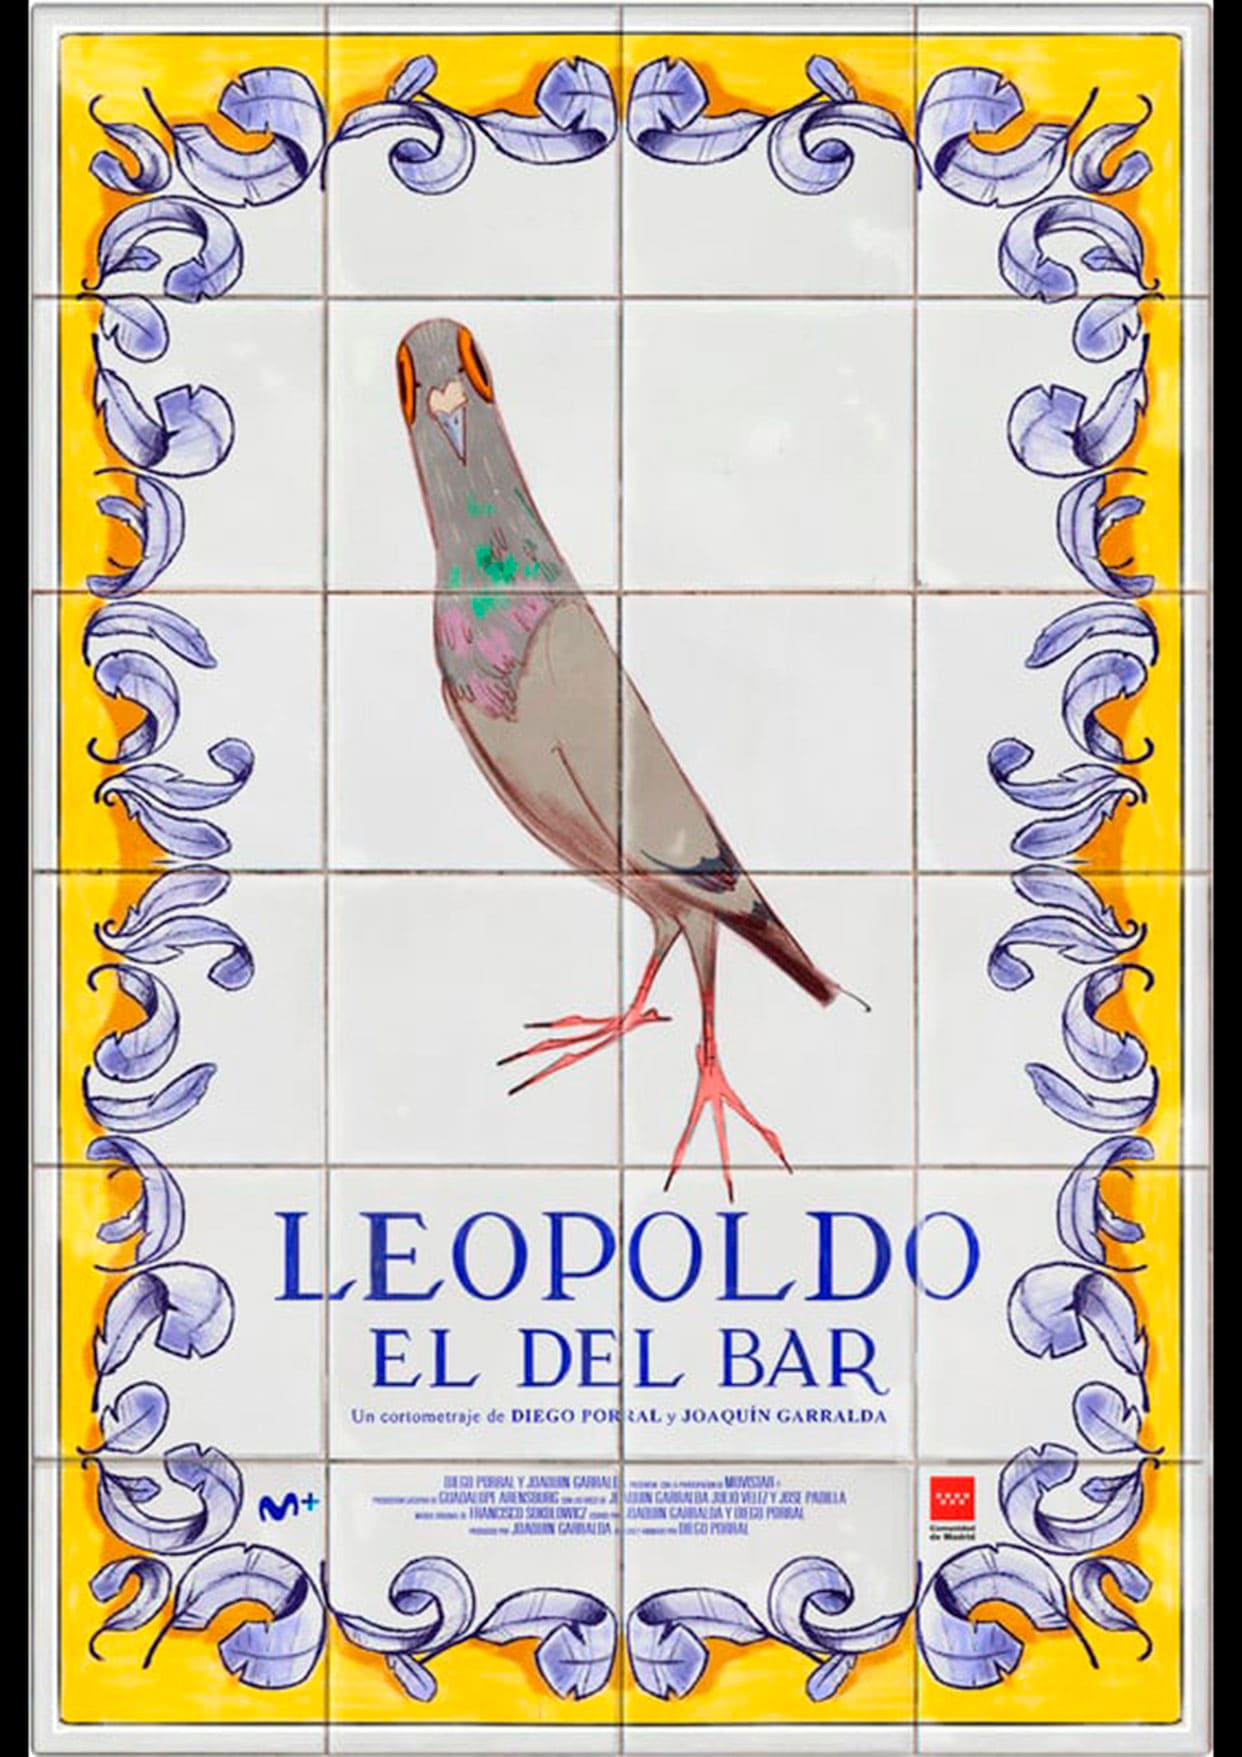 Leopoldo from the bar